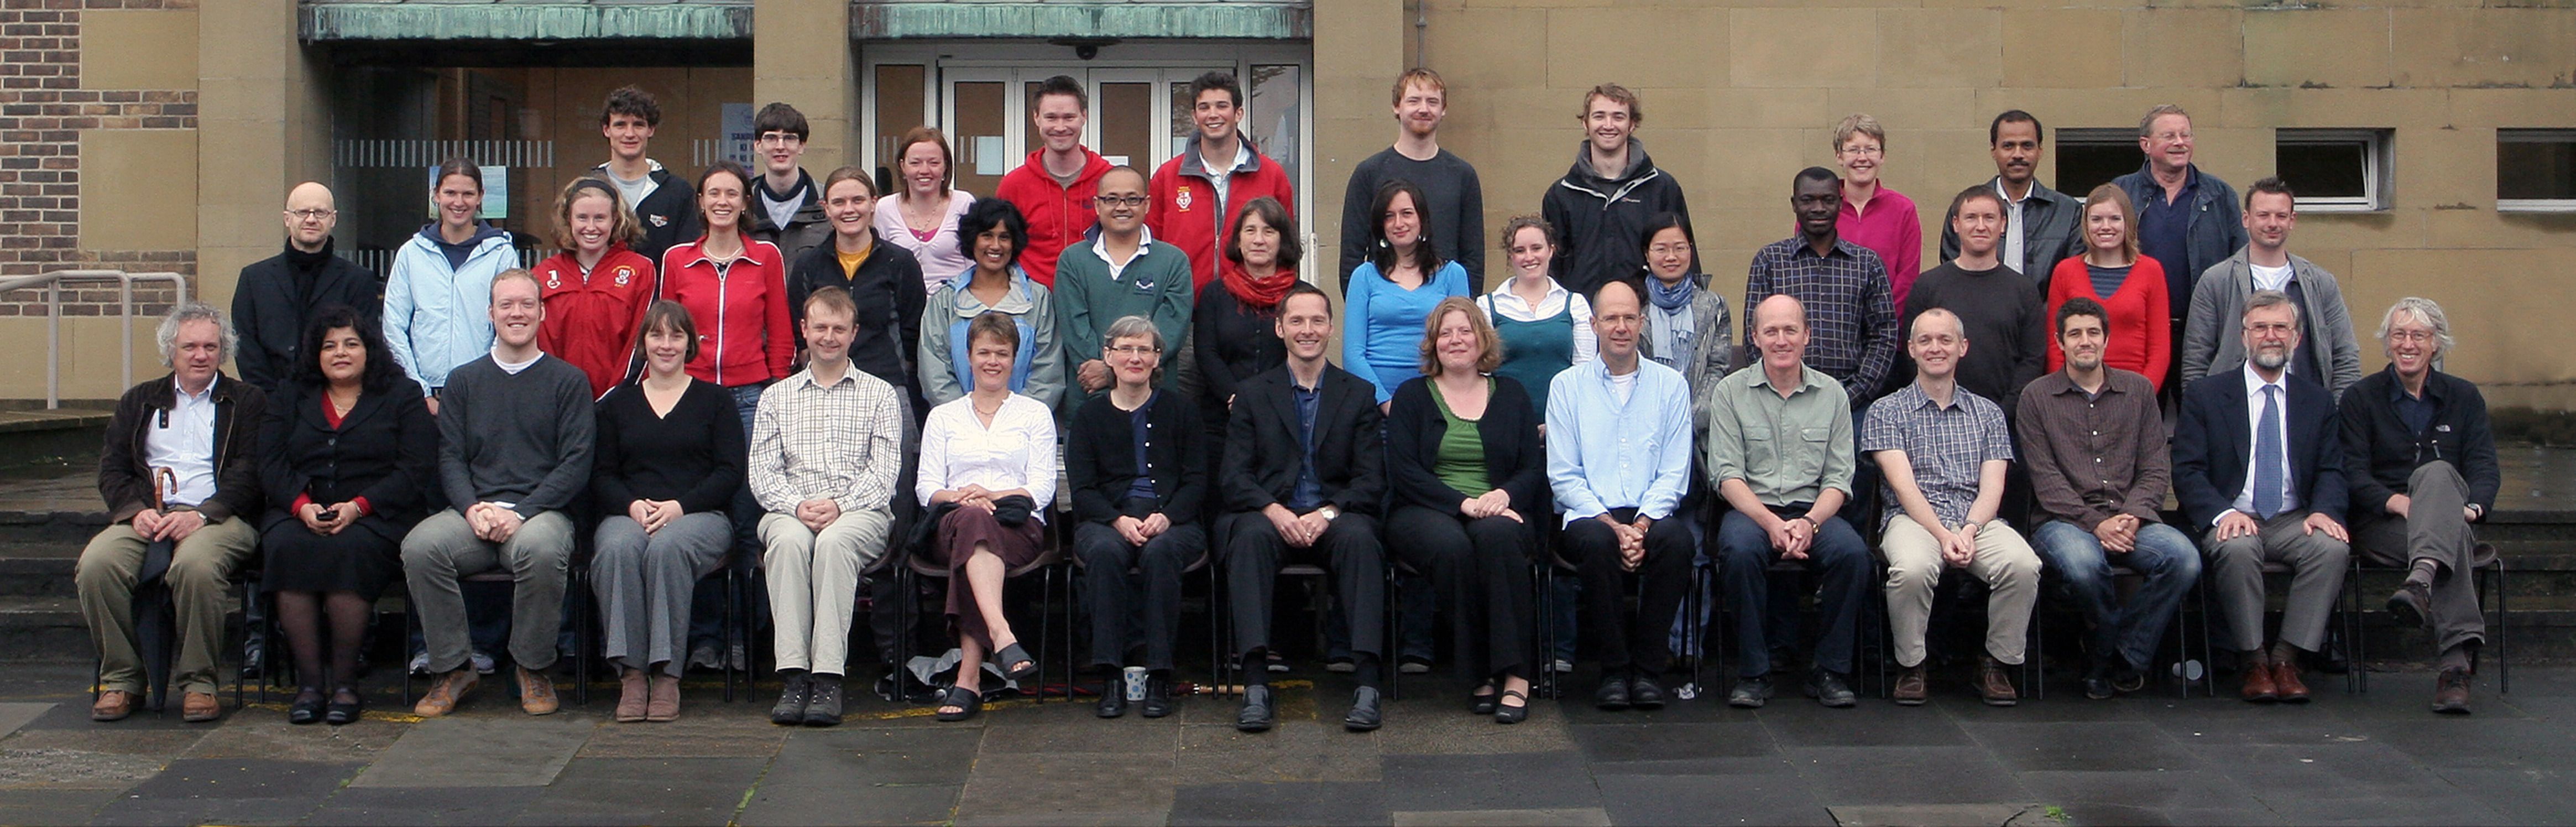 Geography Department Postgraduate Group Photo from 2007